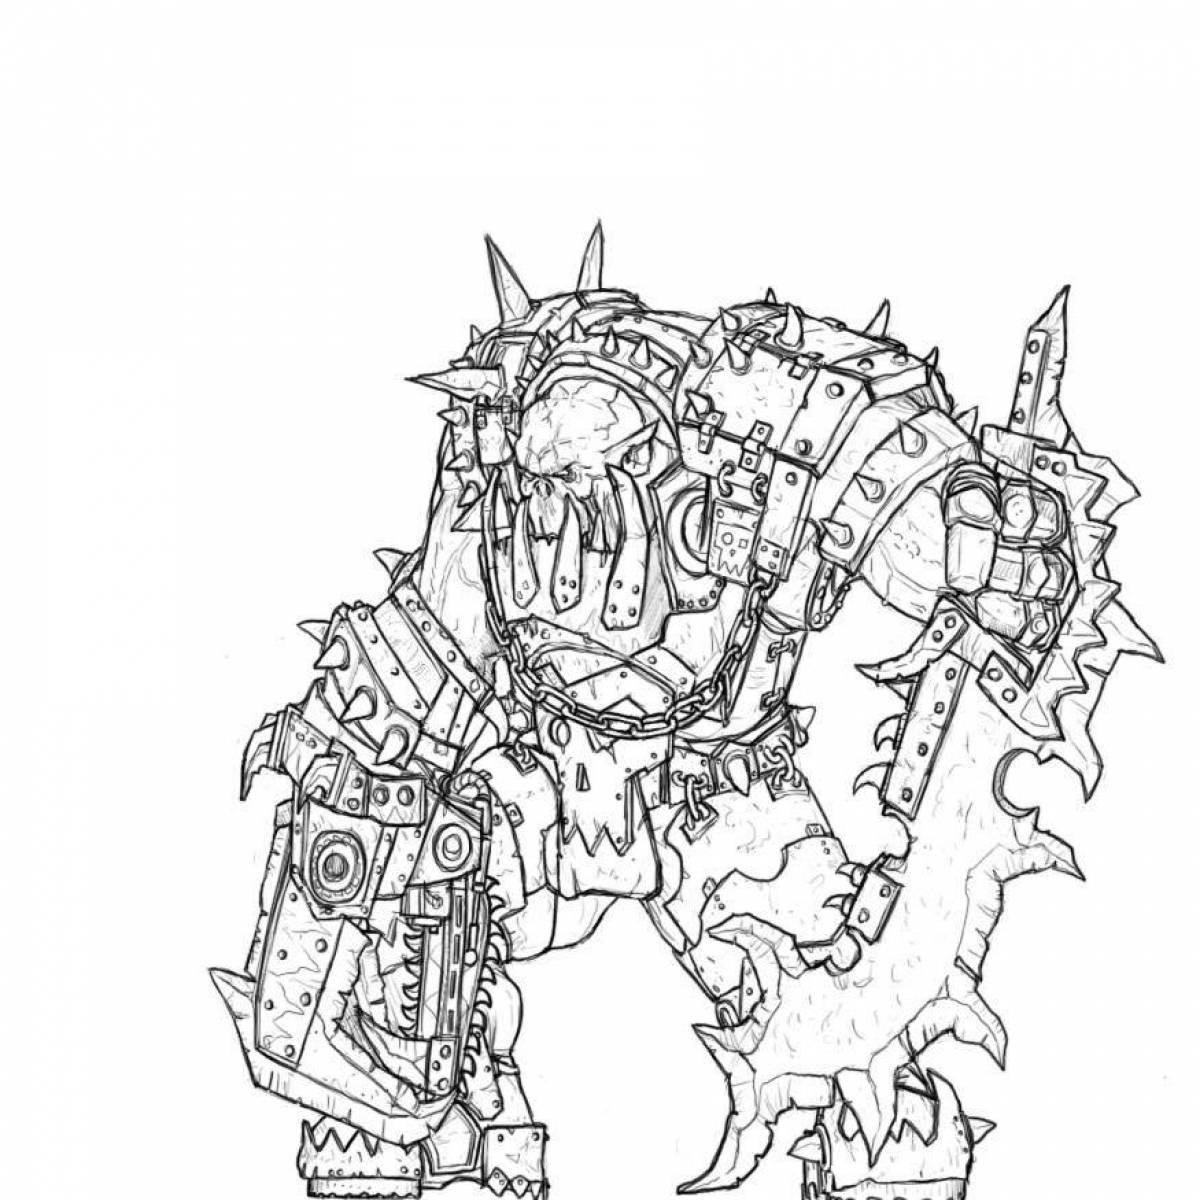 Glowing Warhammer coloring page